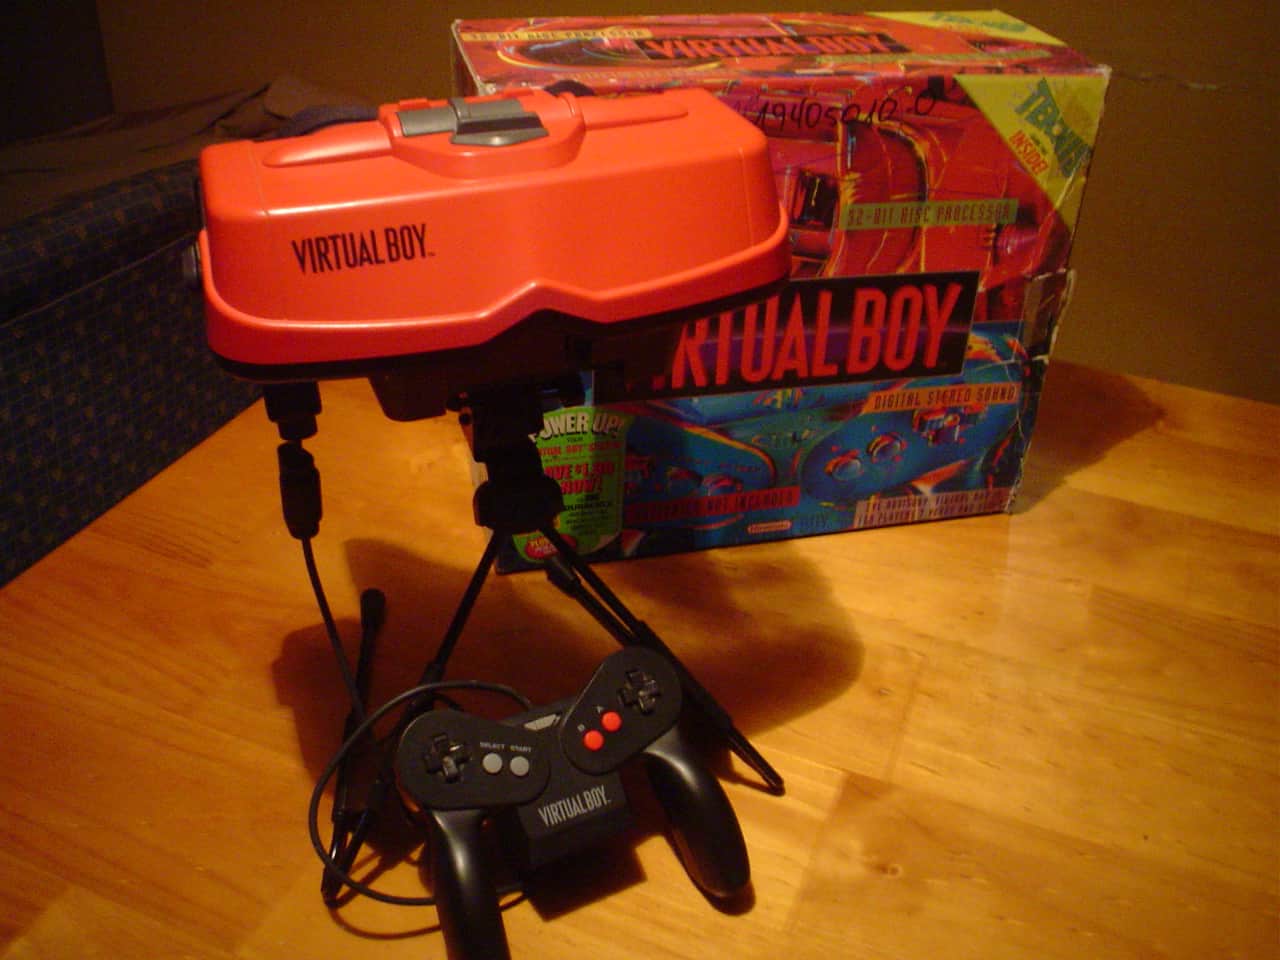 Nintendo's Virtual Boy console was met with a lukewarm reception when it was released in 1995. Photo by https://www.flickr.com/photos/afrokid/